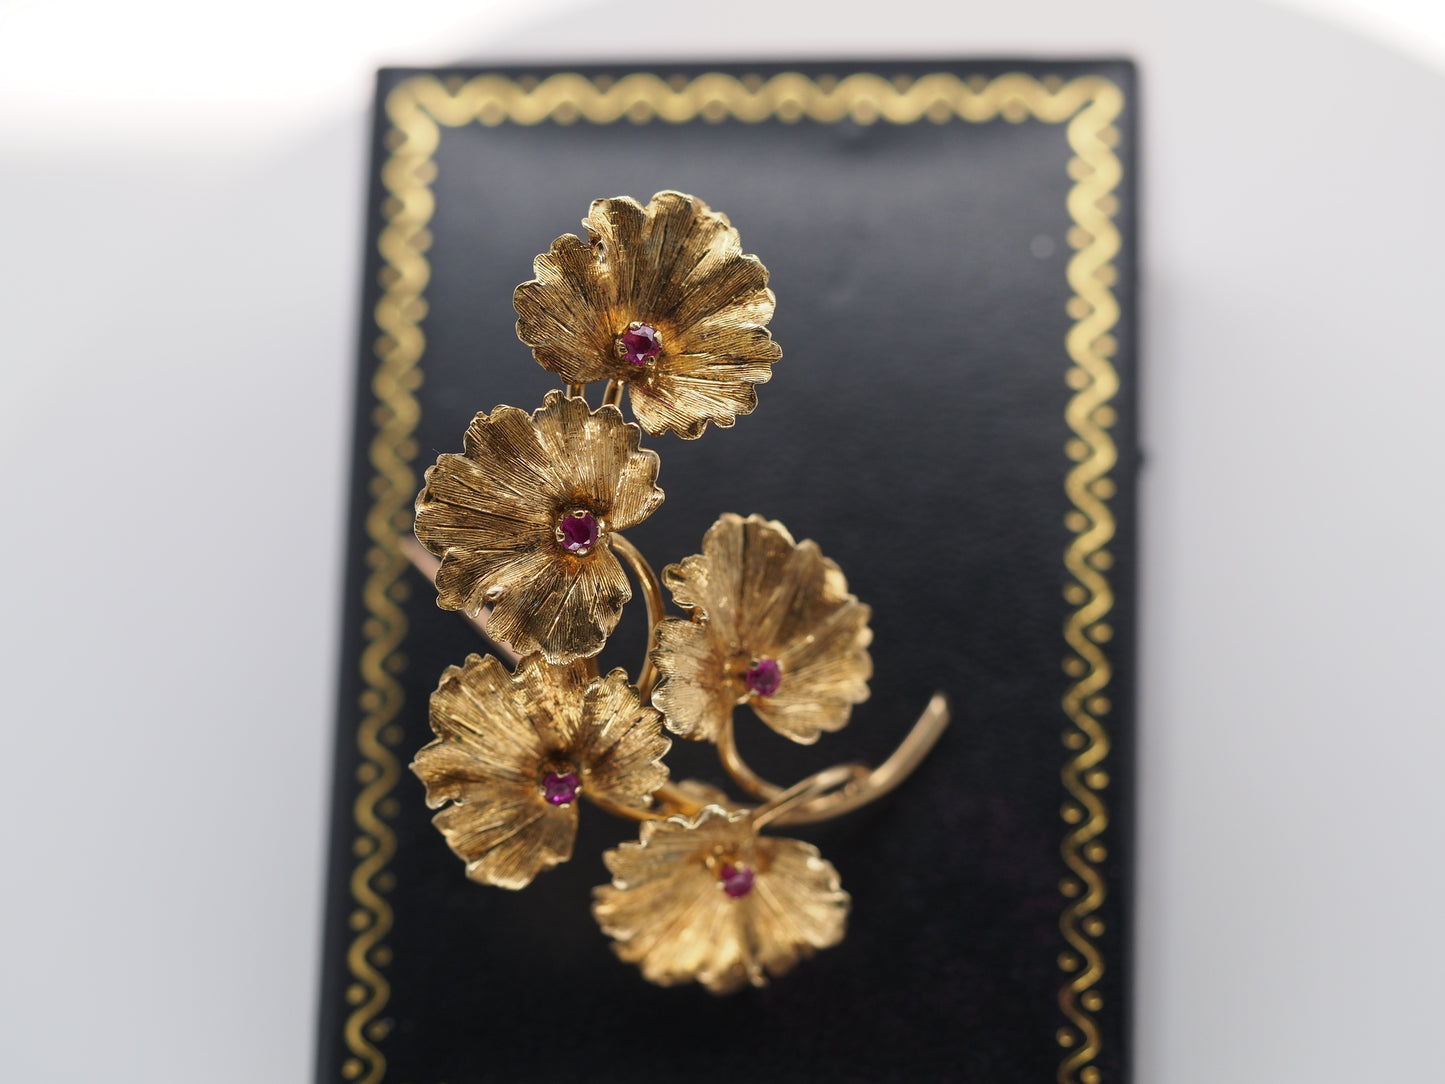 Tiffany & Co 18K Yellow Gold Flower Brooch with Rubies